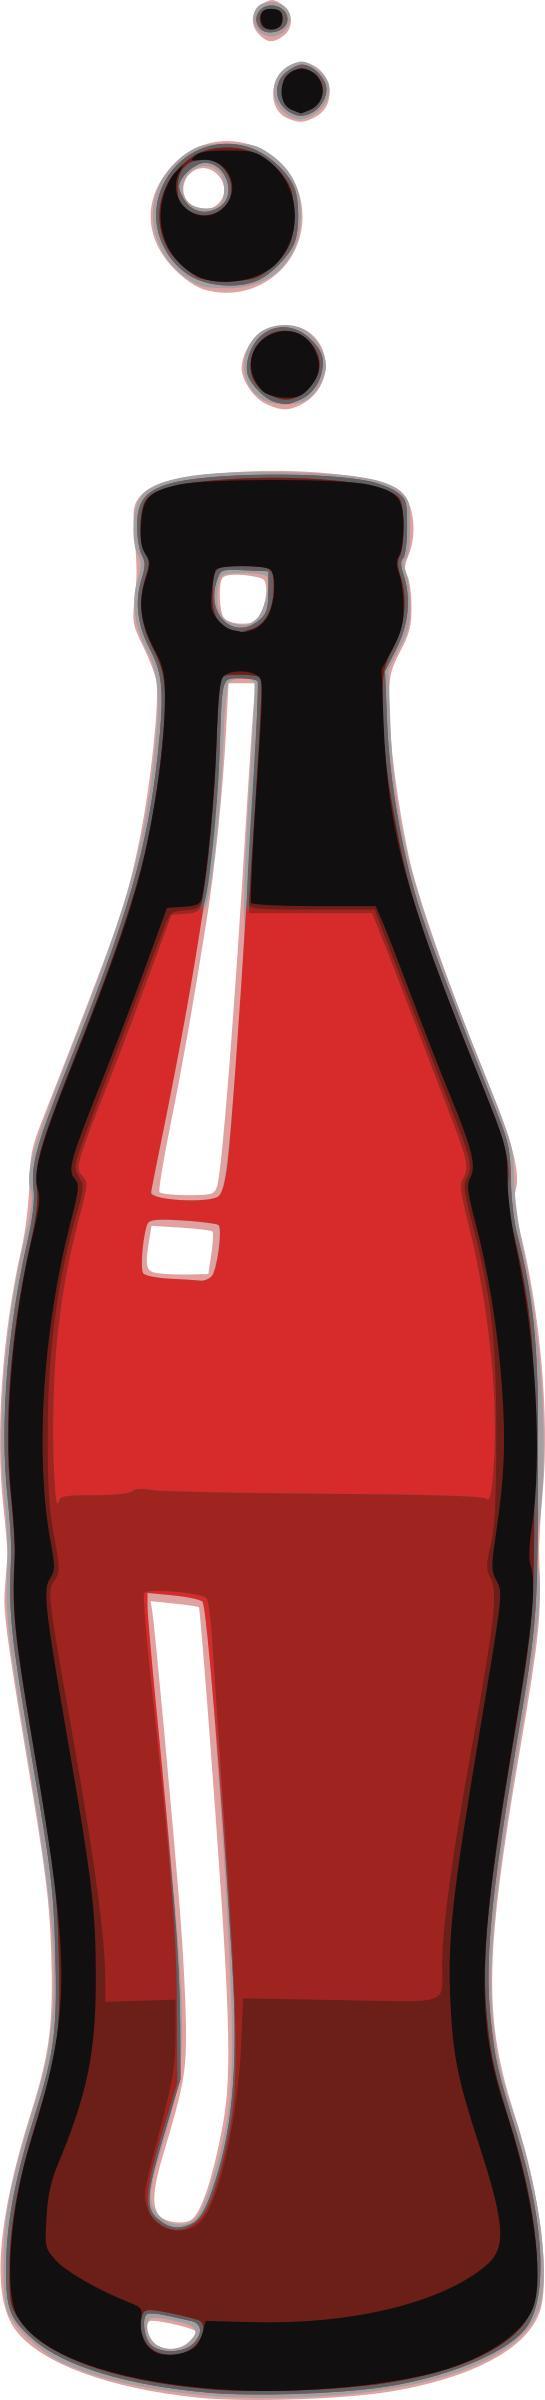 Bottle with Soda png transparent